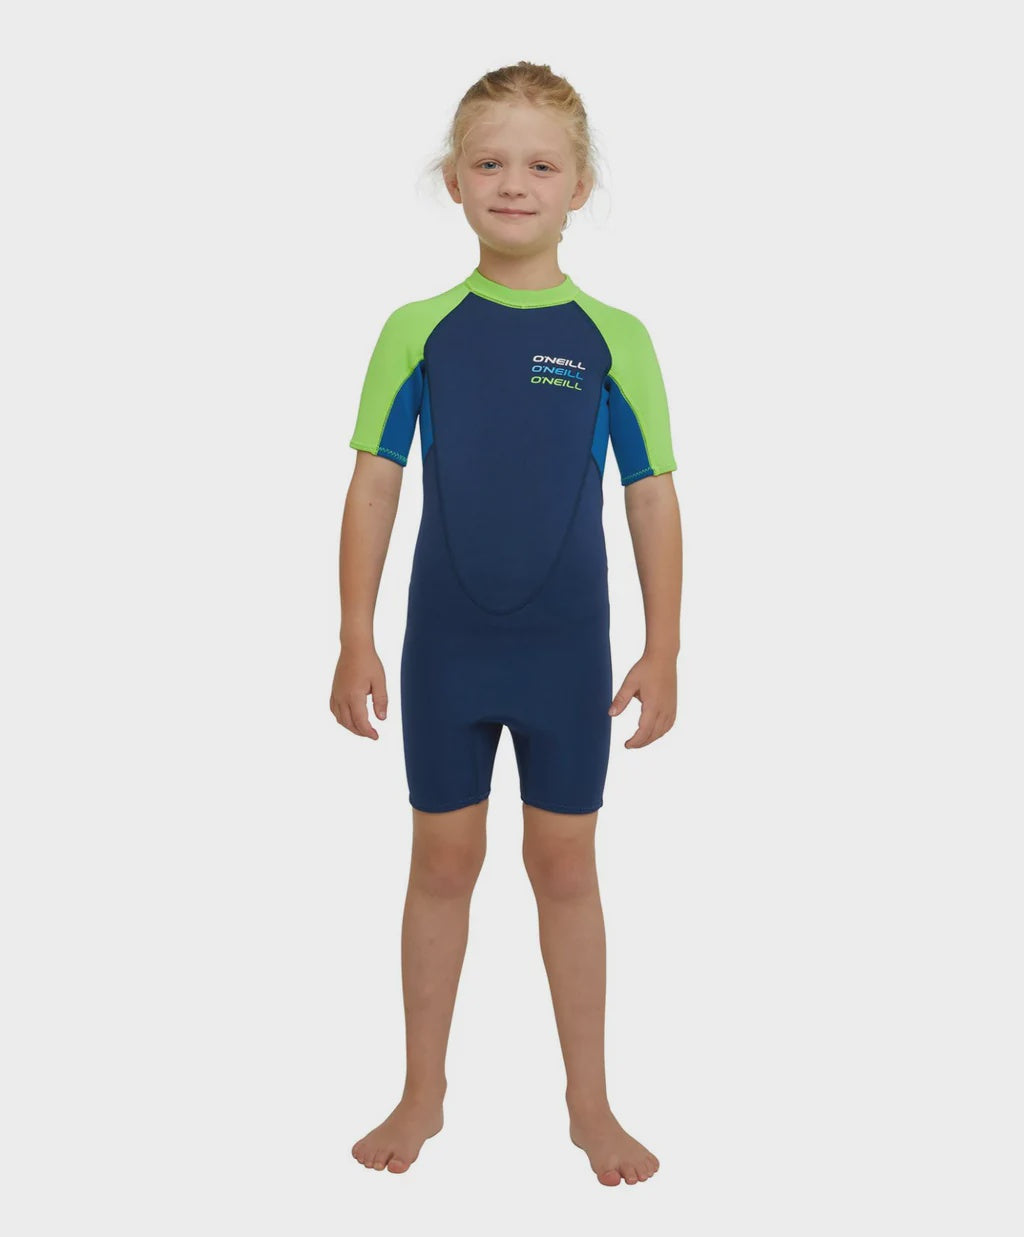 Toddler's Reactor Spring Suit 2mm Wetsuit - Boys